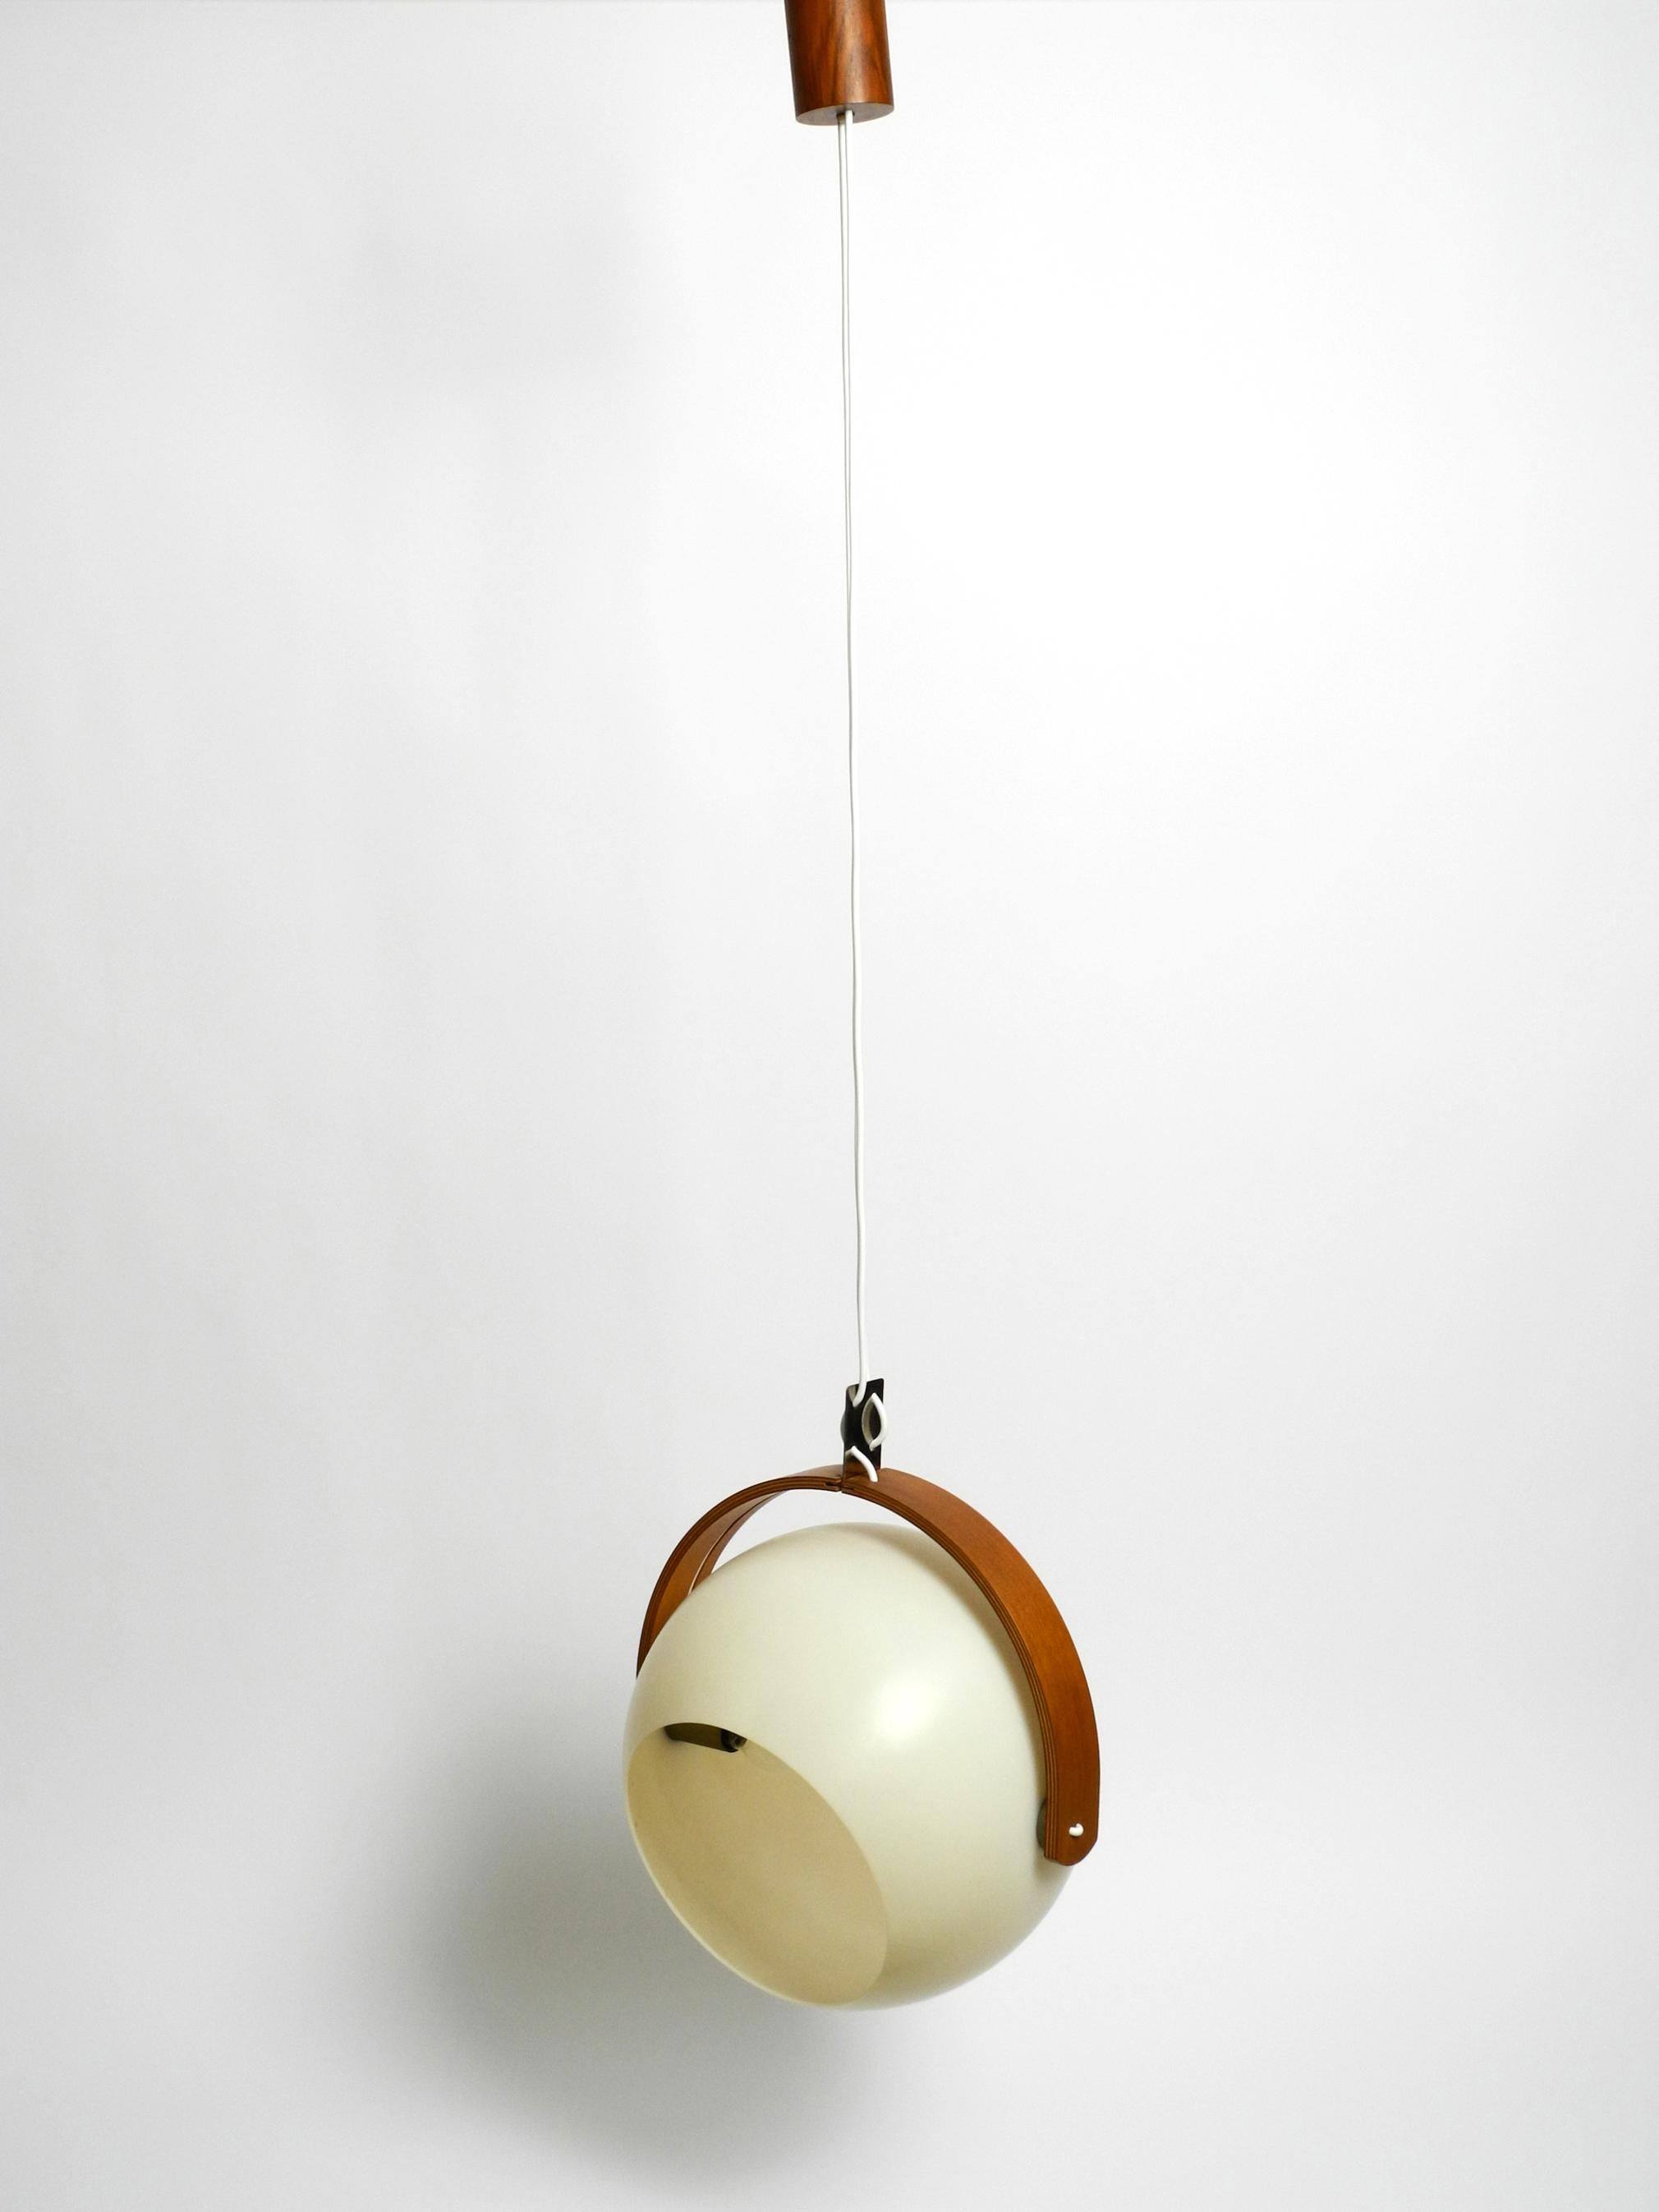 60s Temde Space Age pendant lamp with teak plywood and a sperical lampshade For Sale 3